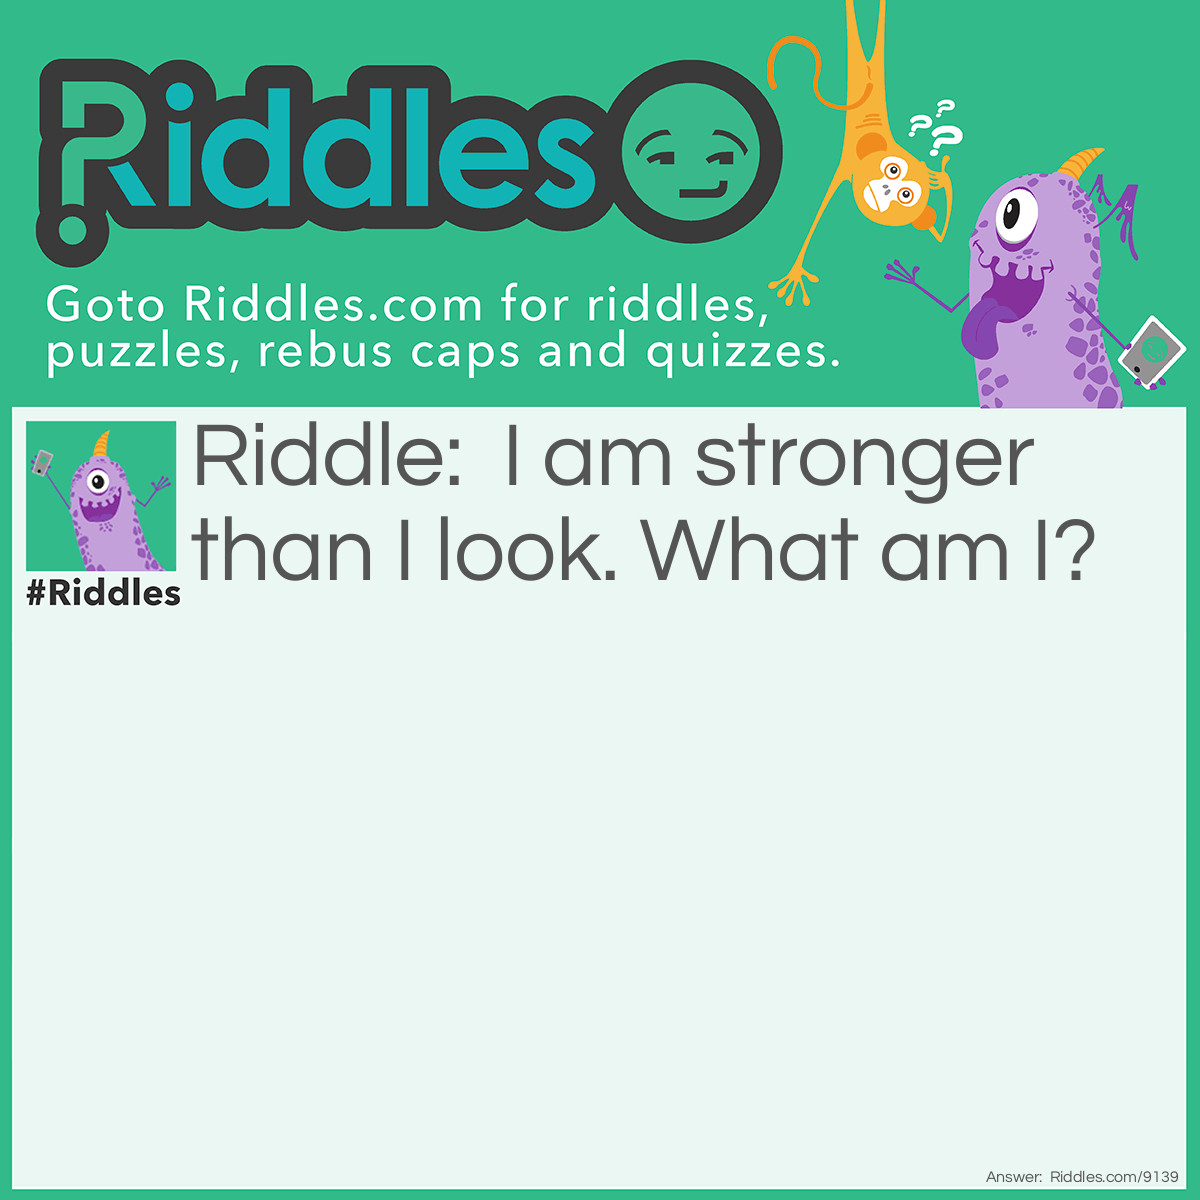 Riddle: I am stronger than I look. What am I? Answer: Oatmeal!